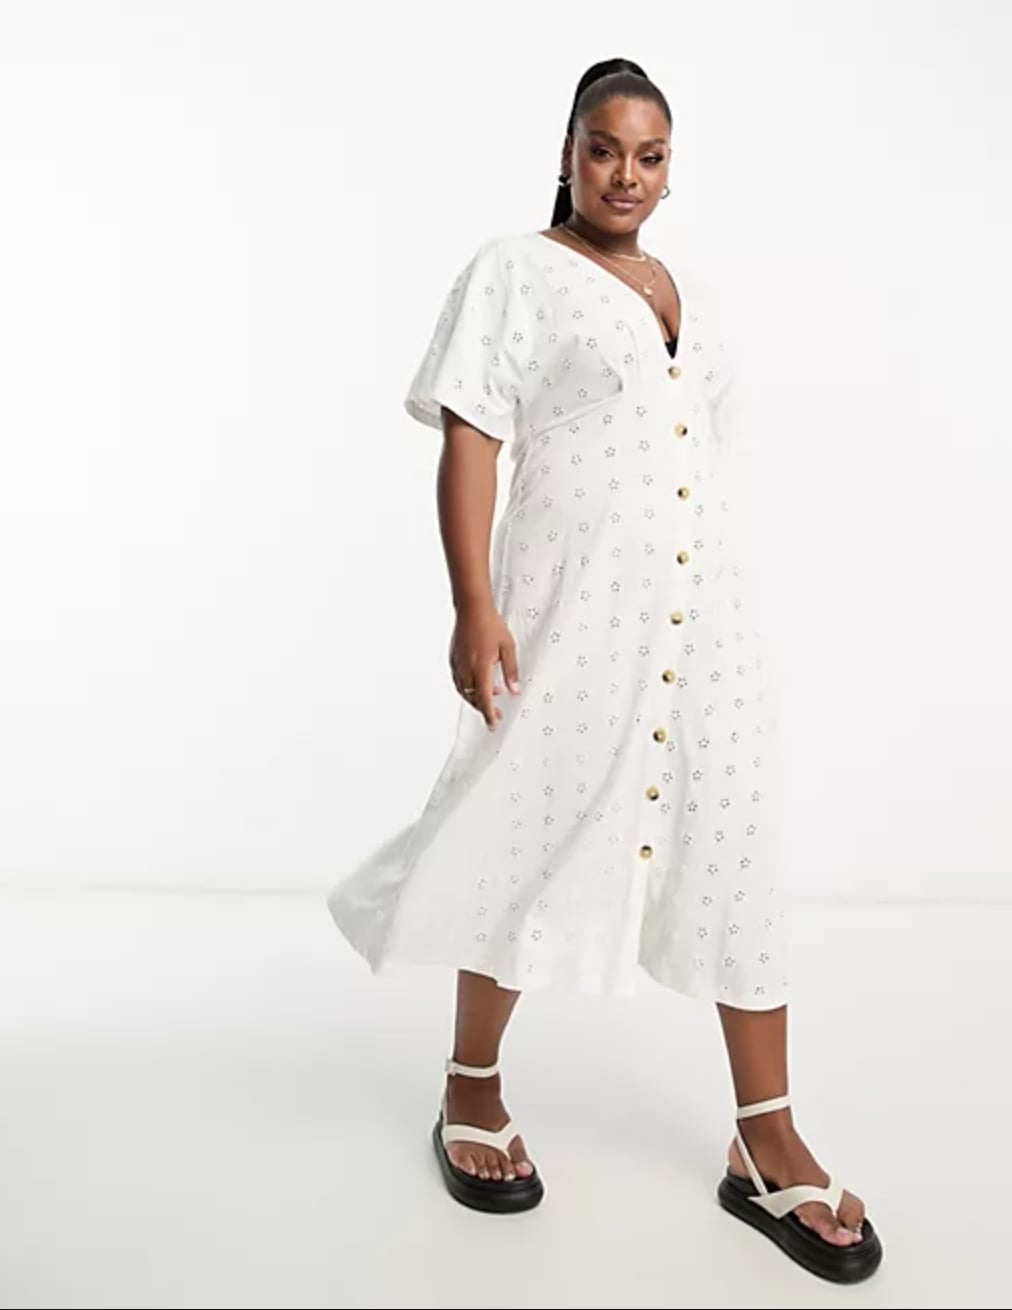 The Best Plus Size White Dresses To Buy This Summer! - My Curves